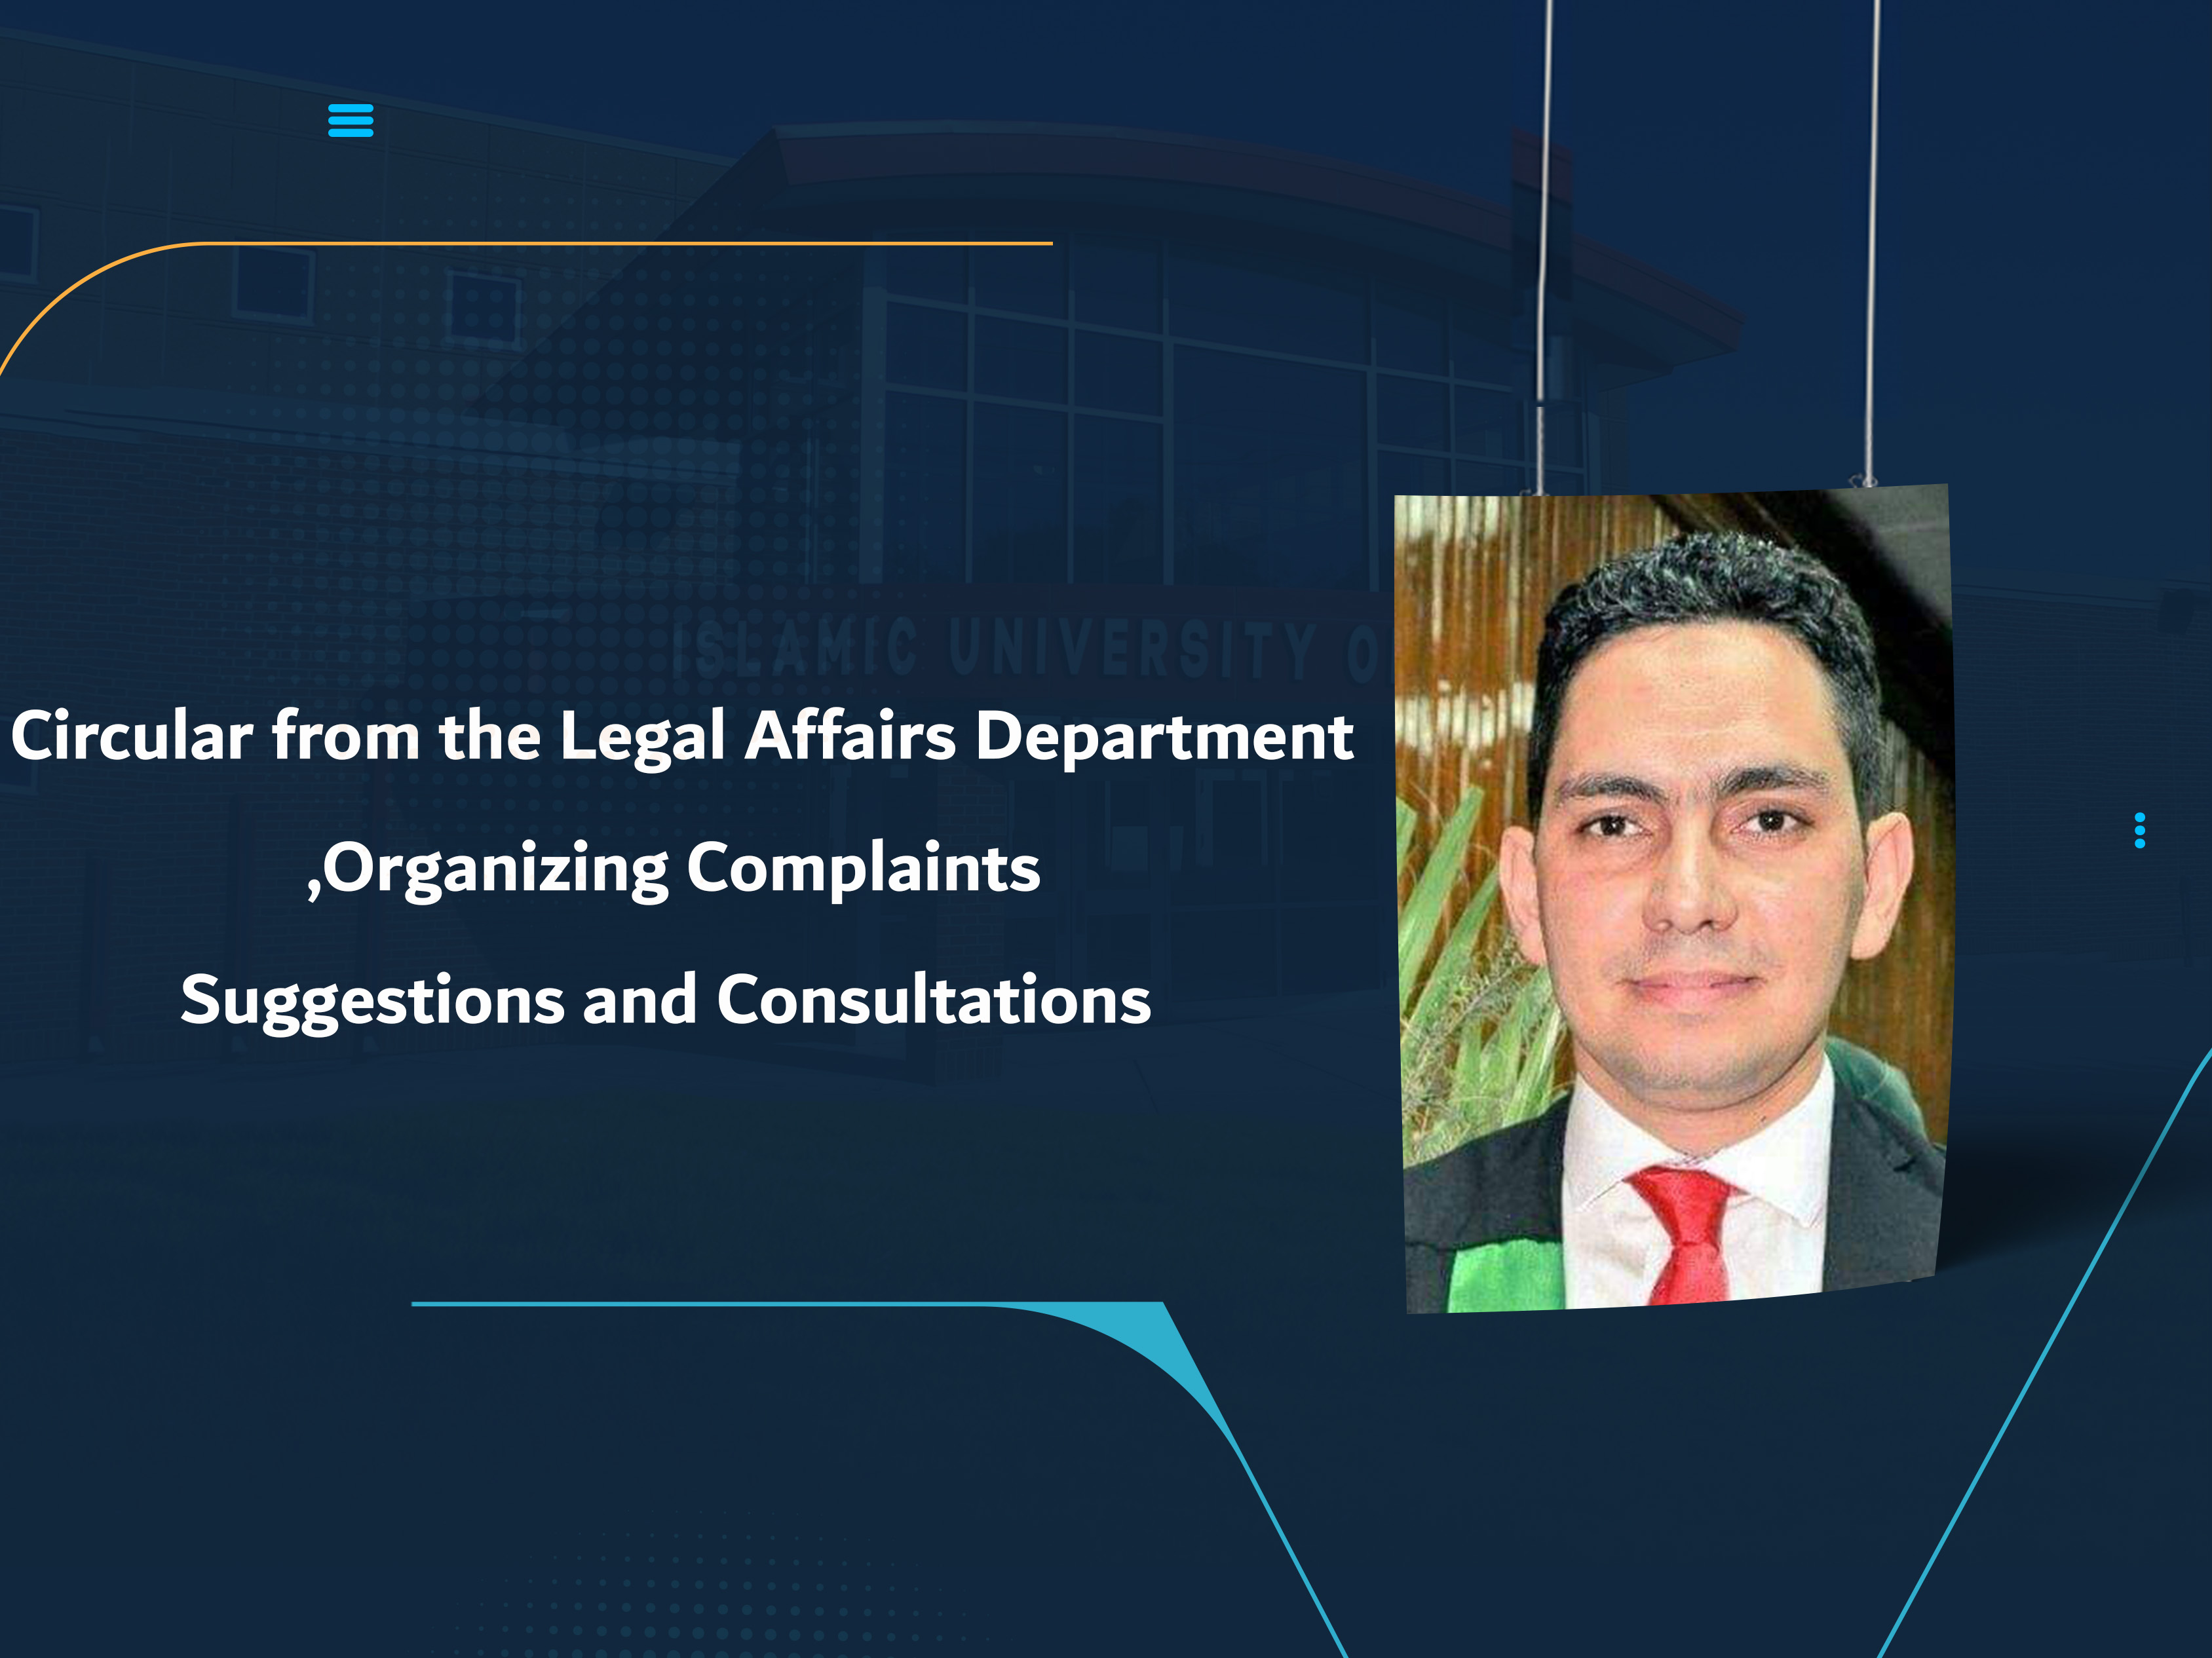 Circular from the Legal Affairs Department: Organizing Complaints, Suggestions and Consultations